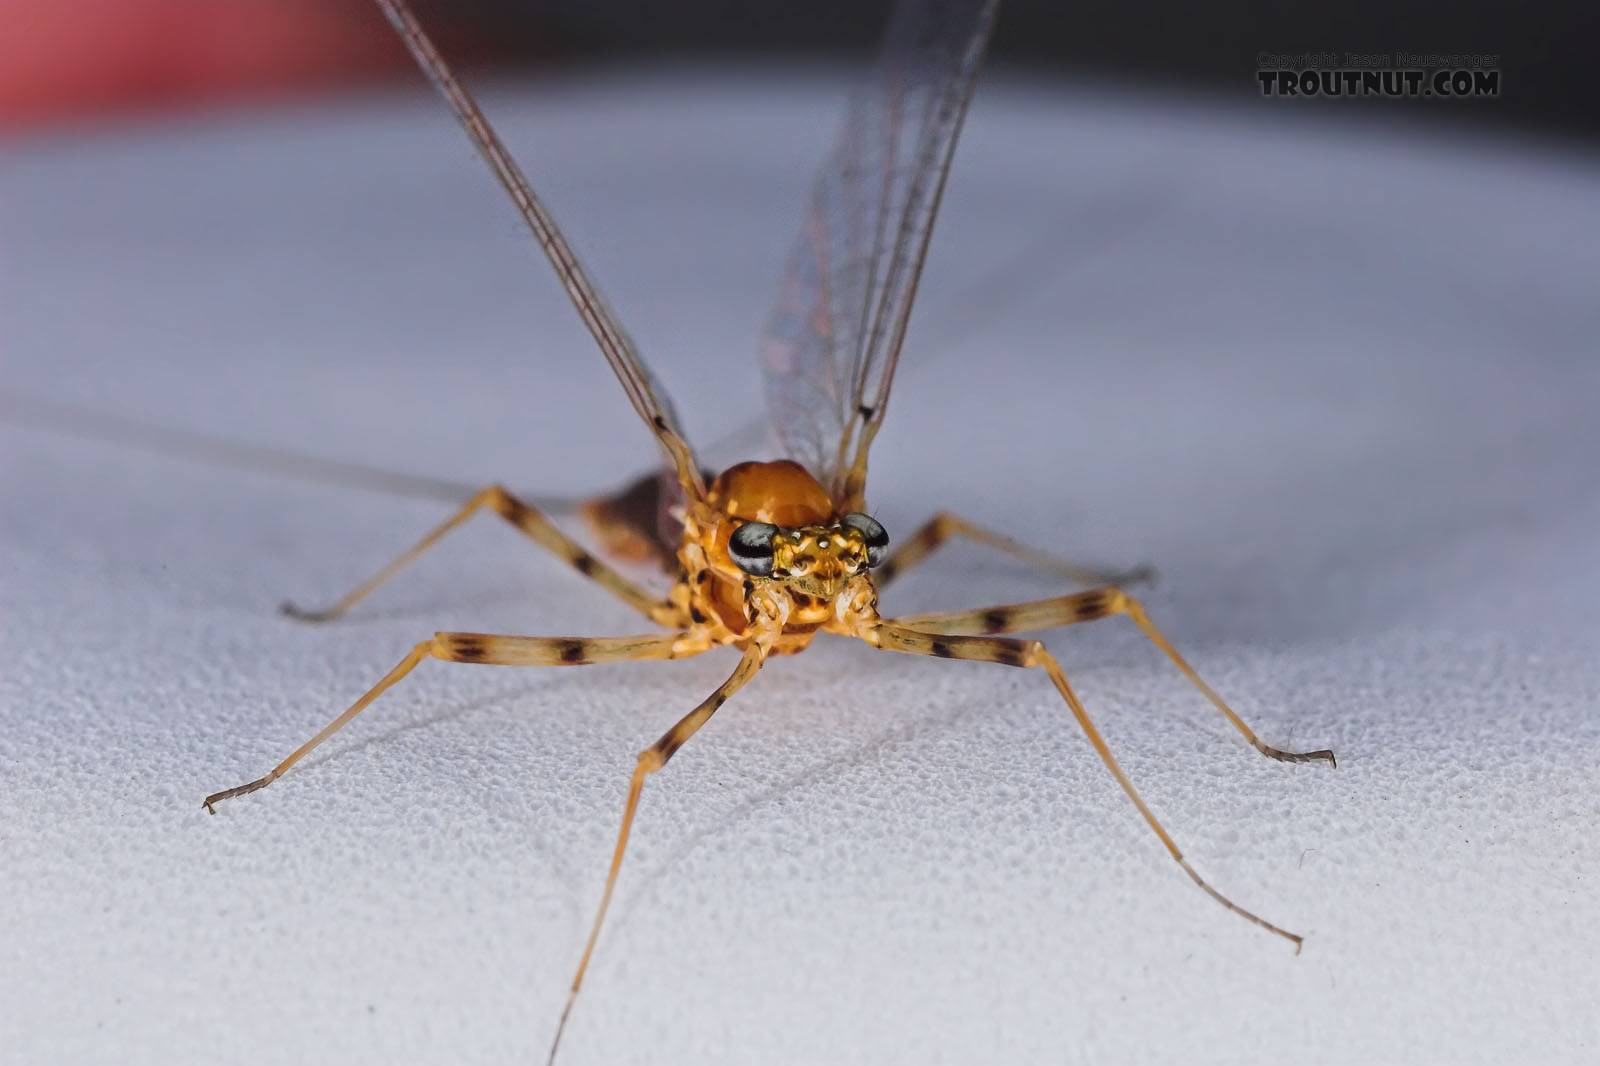 Female Epeorus vitreus (Sulphur) Mayfly Spinner from the Namekagon River in Wisconsin